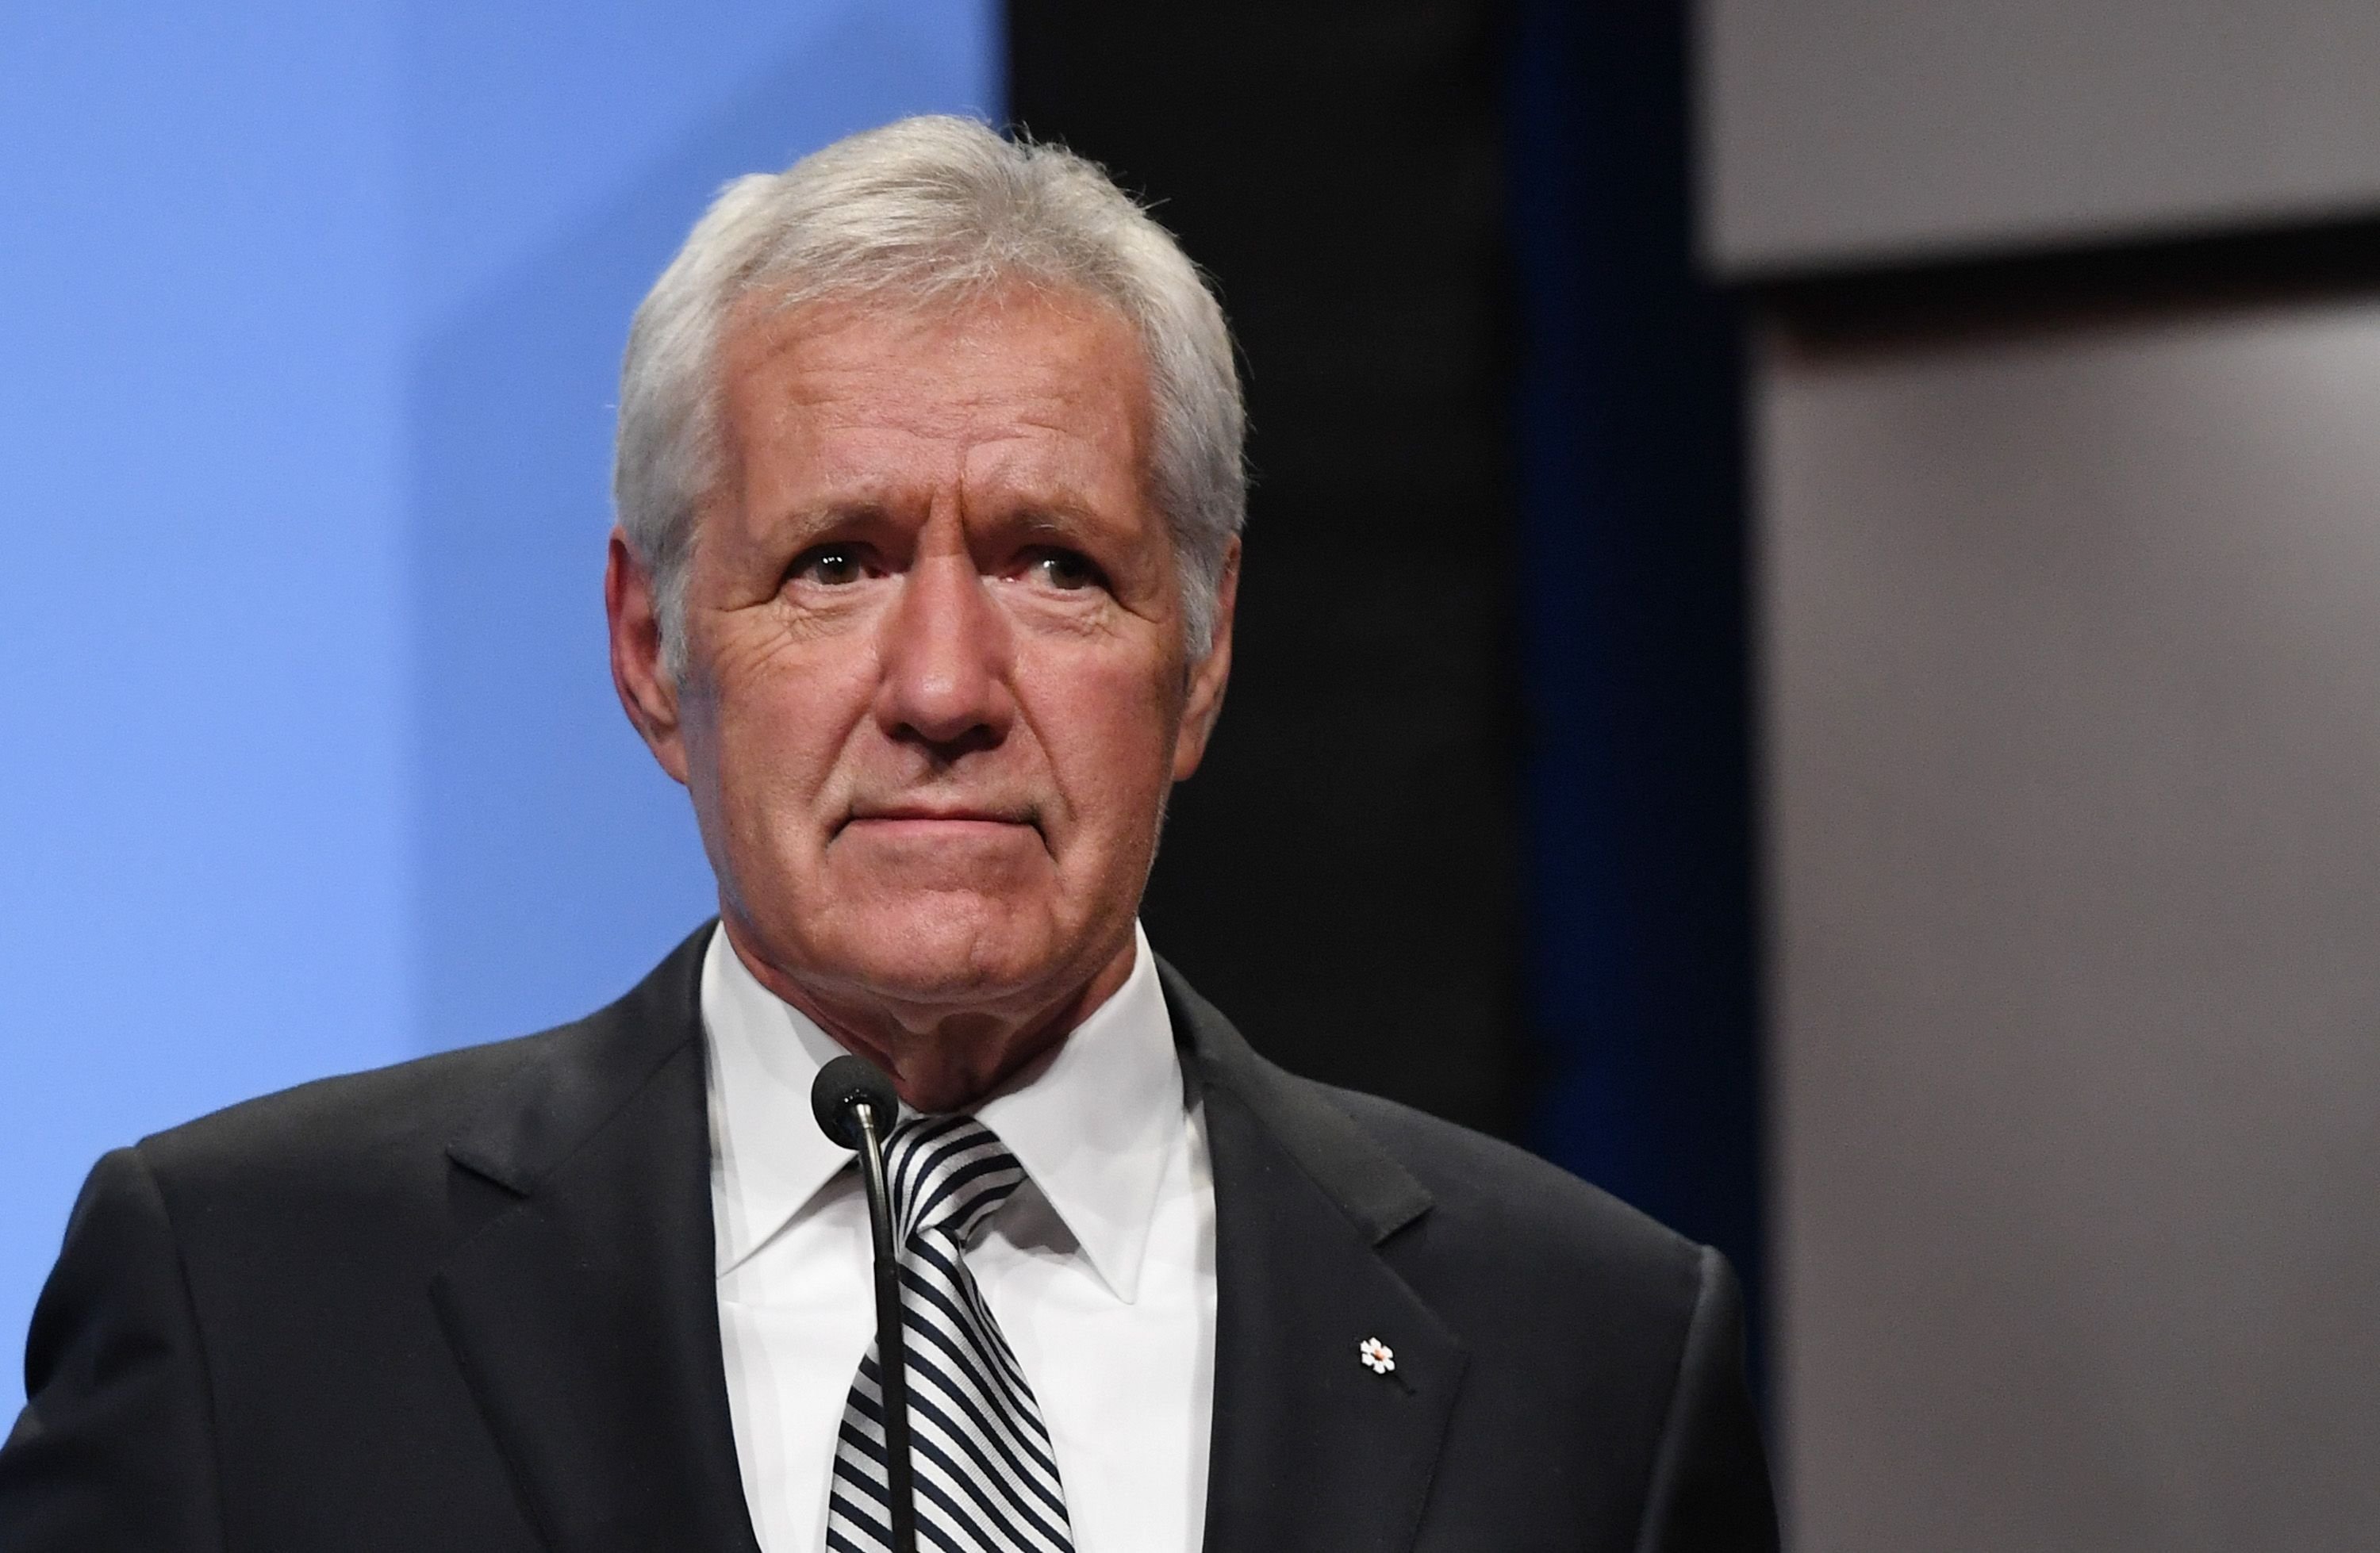 Alex Trebek at his induction into the National Association of Broadcasters Broadcasting Hall of Fame at Encore Las Vegas on April 9, 2018 | Photo: Getty Images